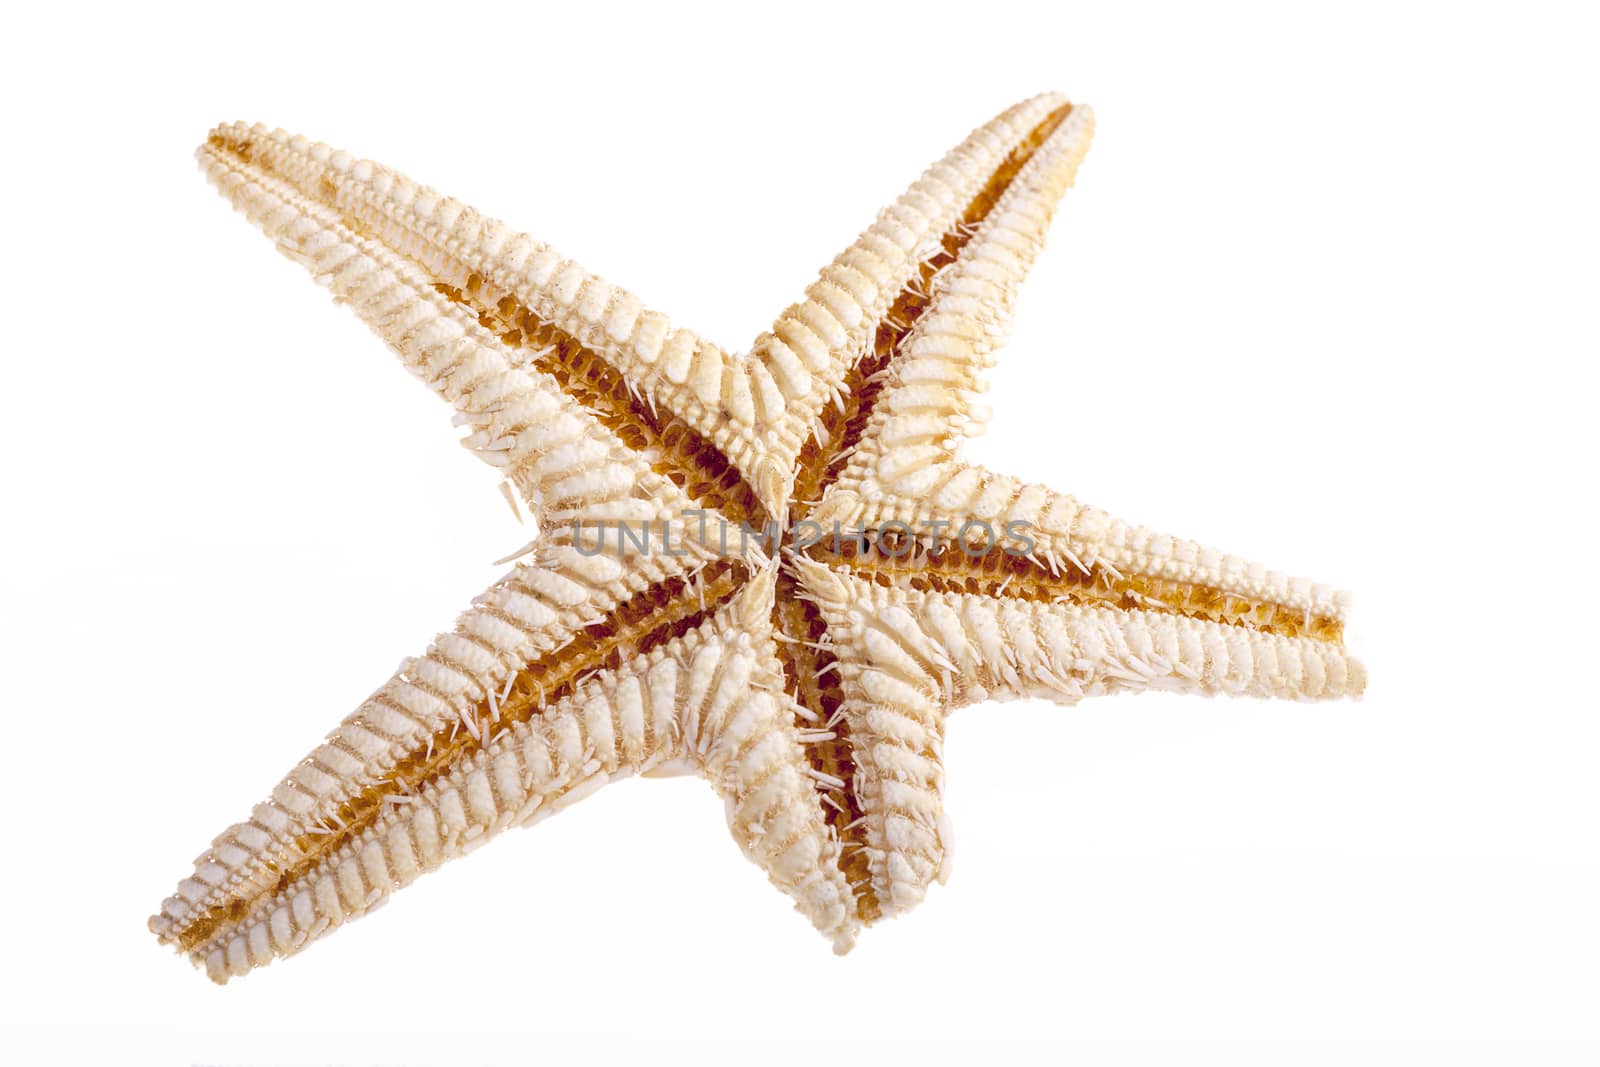 Single sea star isolated on white background  by mychadre77